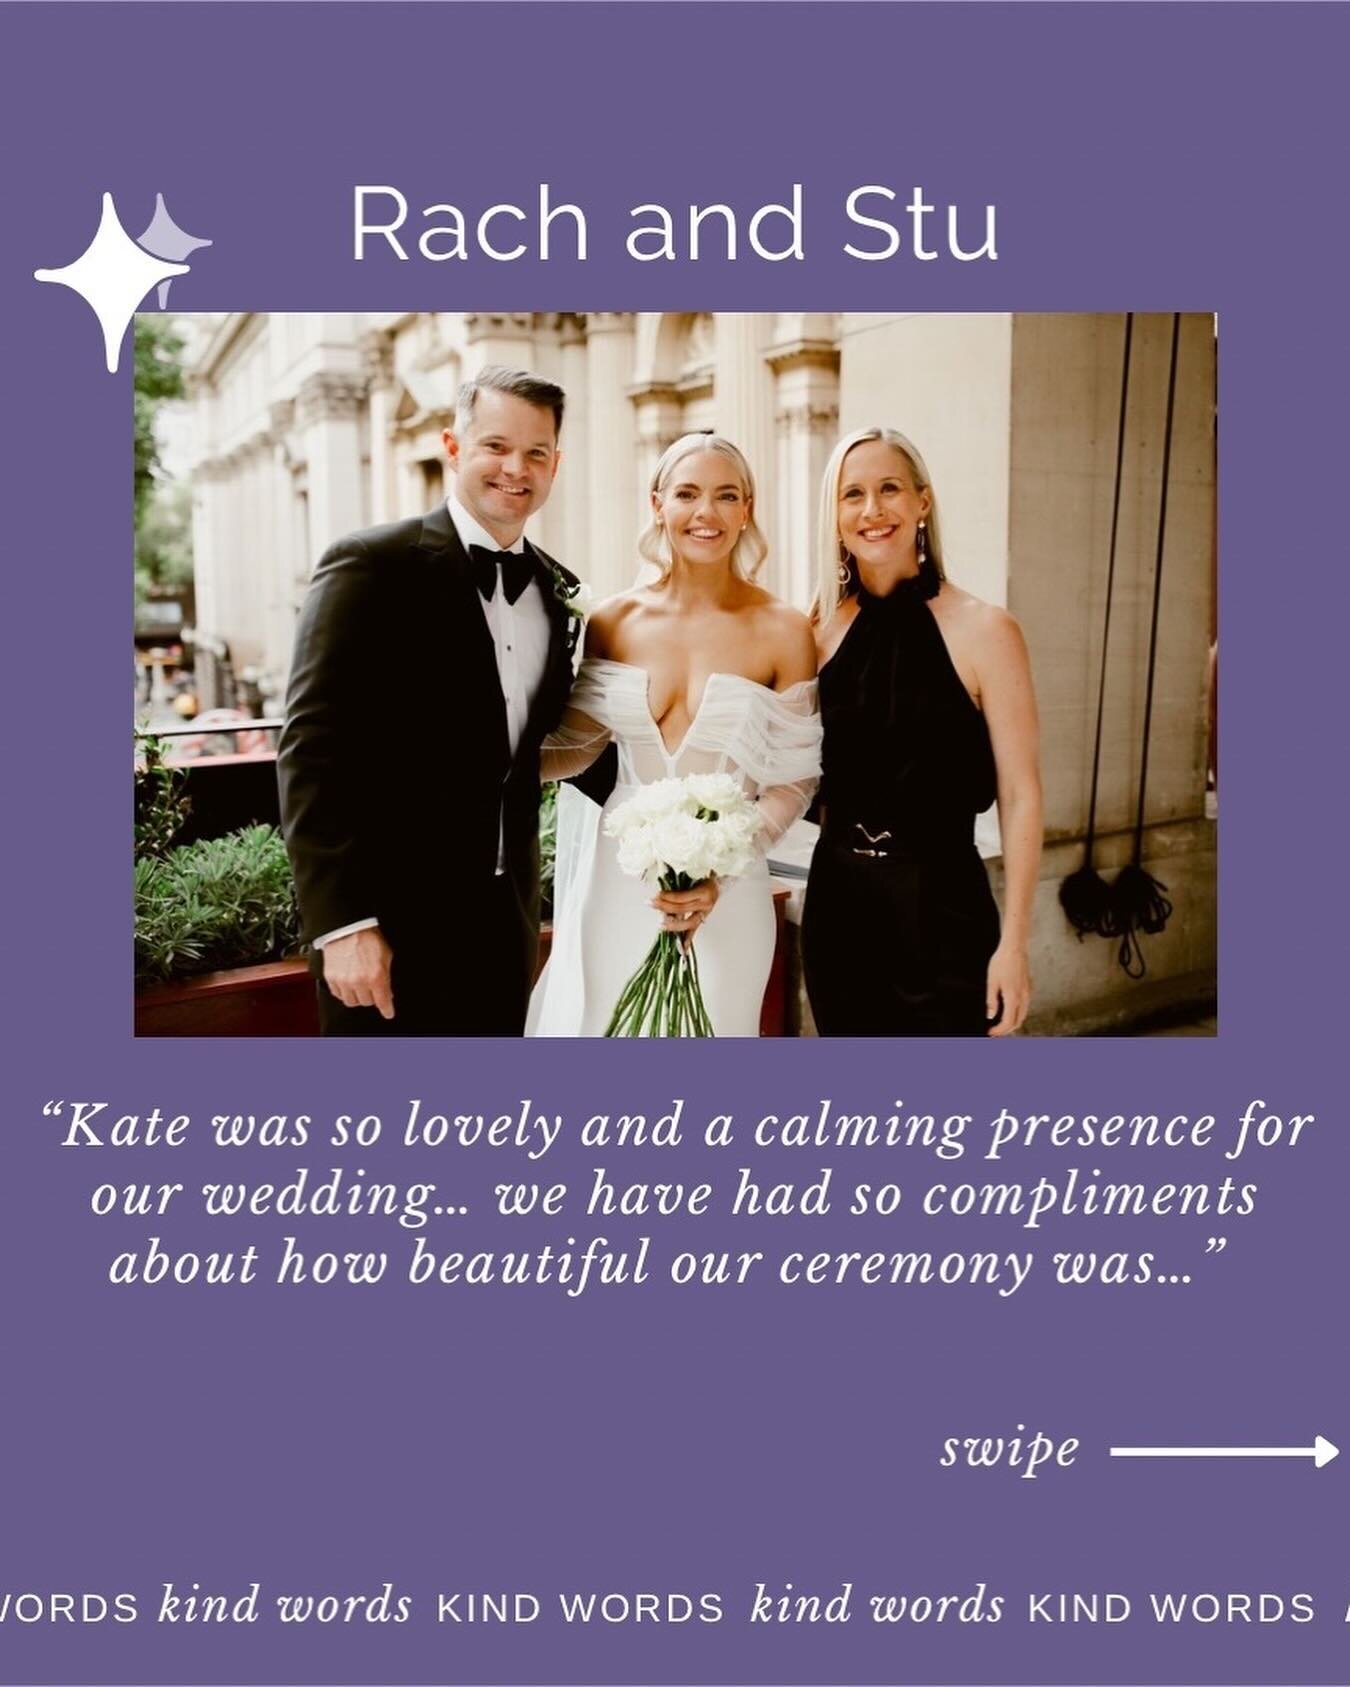 Celebrating Rach and Stu was so special!! Here&rsquo;s their Google Review&hellip;

&ldquo;Kate was so lovely and a calming presence for our wedding last Friday. We have had so many compliments about how beautiful our ceremony was and that&rsquo;s al